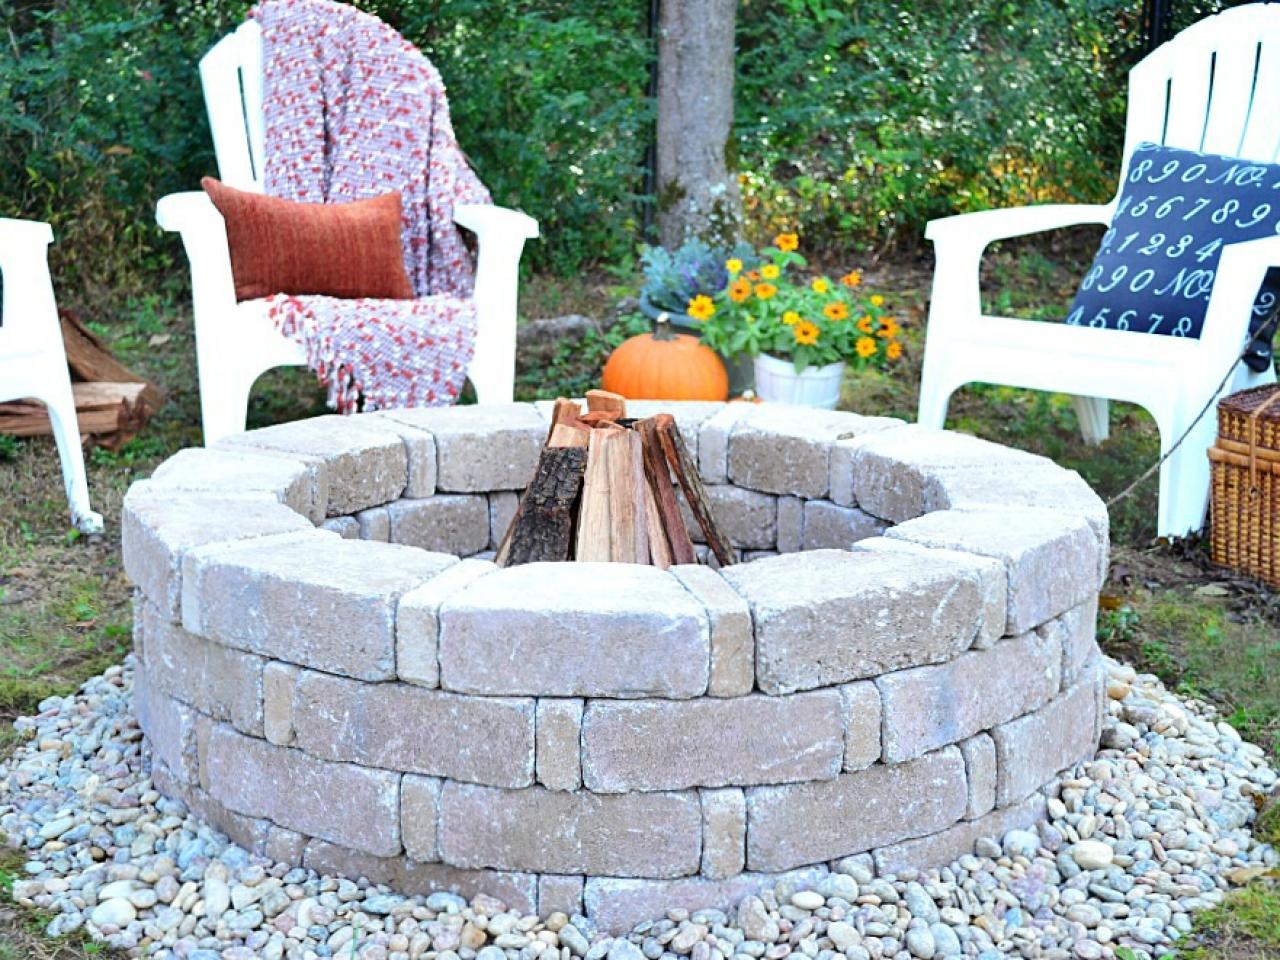 30 Amazing Diy Fire Pit Ideas  Cinder block fire pit, In ground fire pit,  Fire pit